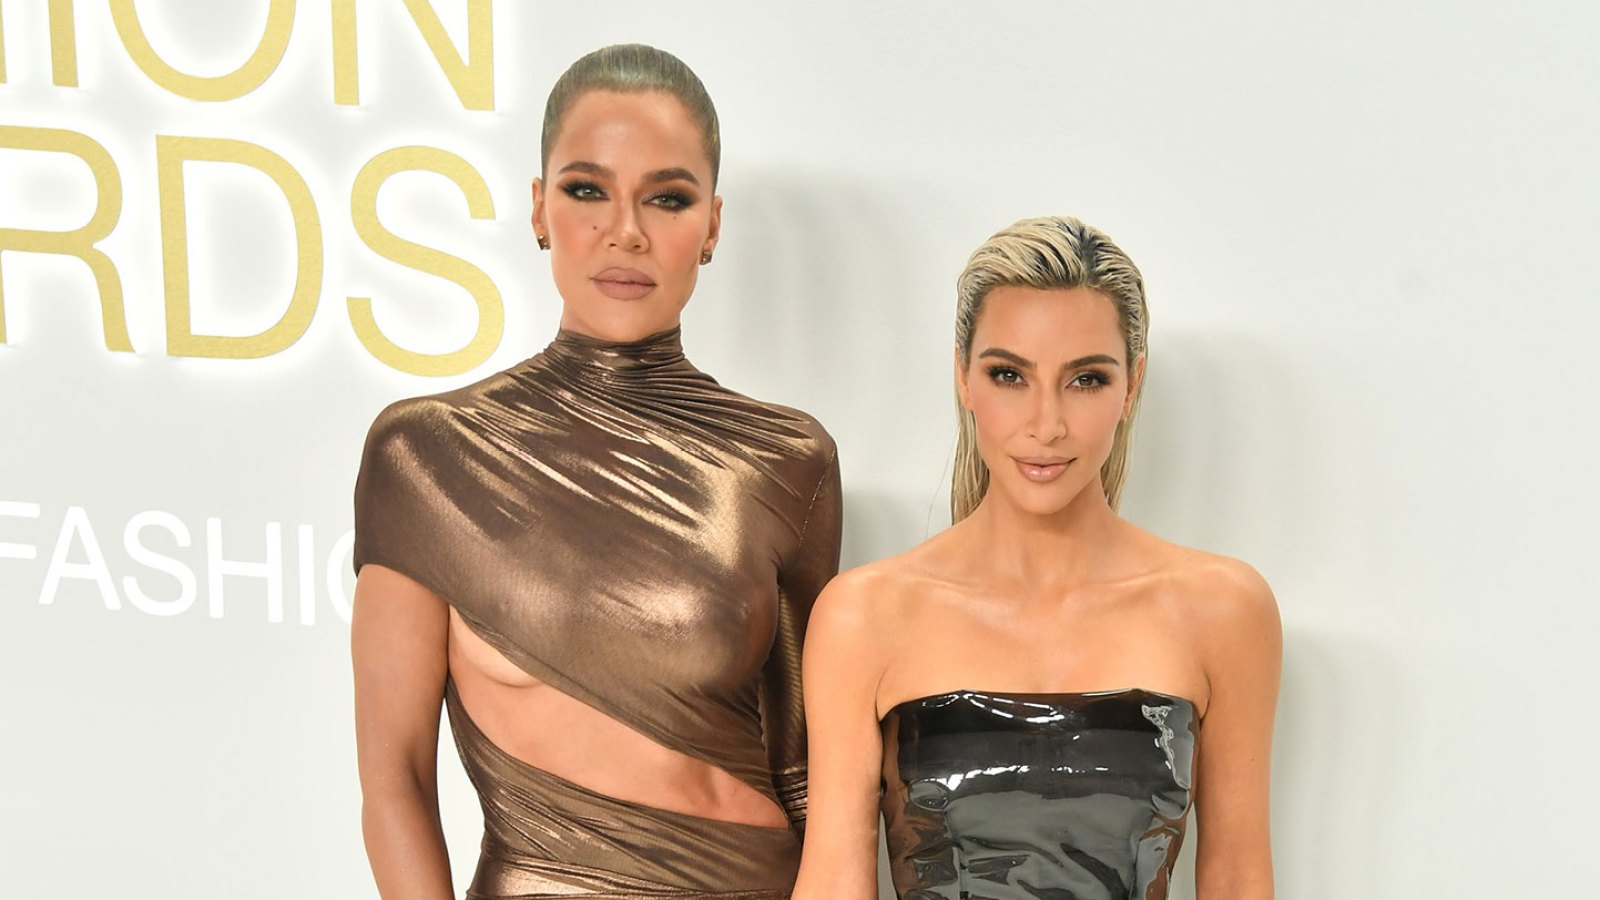 Kim Revives ‘KUWTK’ Audio of Her Making Fun of Khloé’s ‘Sparkly’ Style